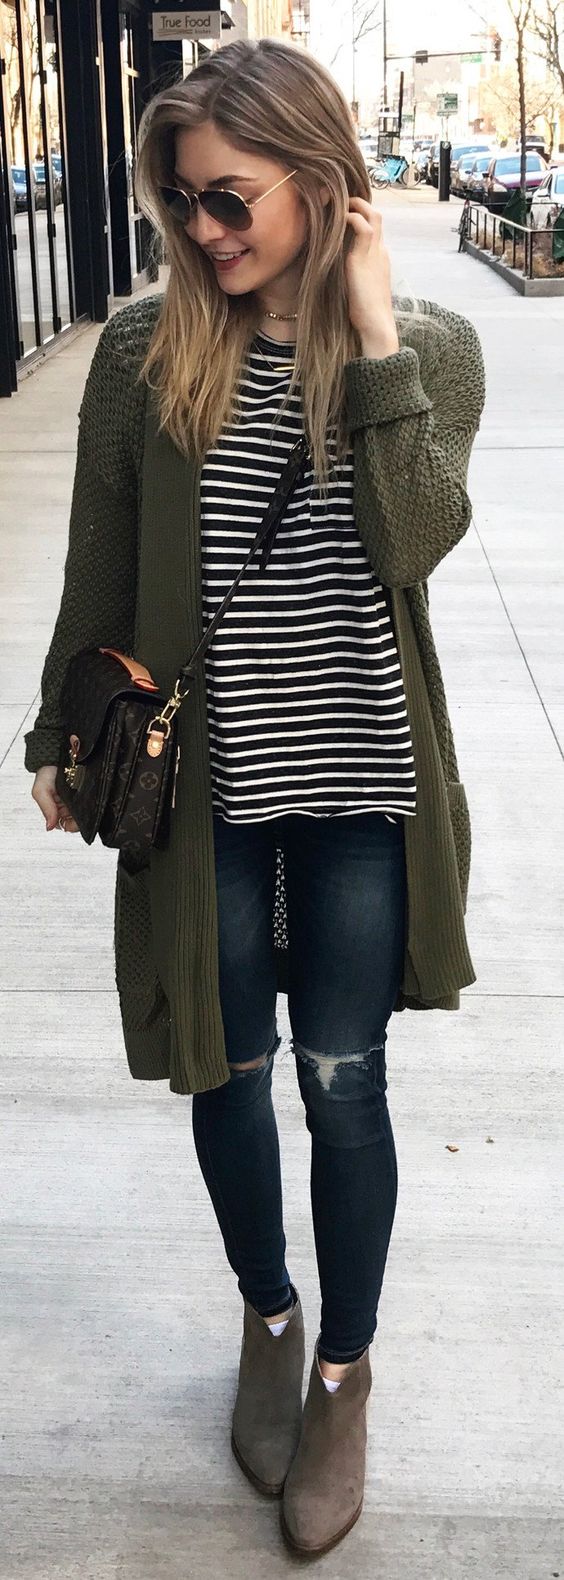 casual style addict: stripped top + bag + cardigan + rips + boots